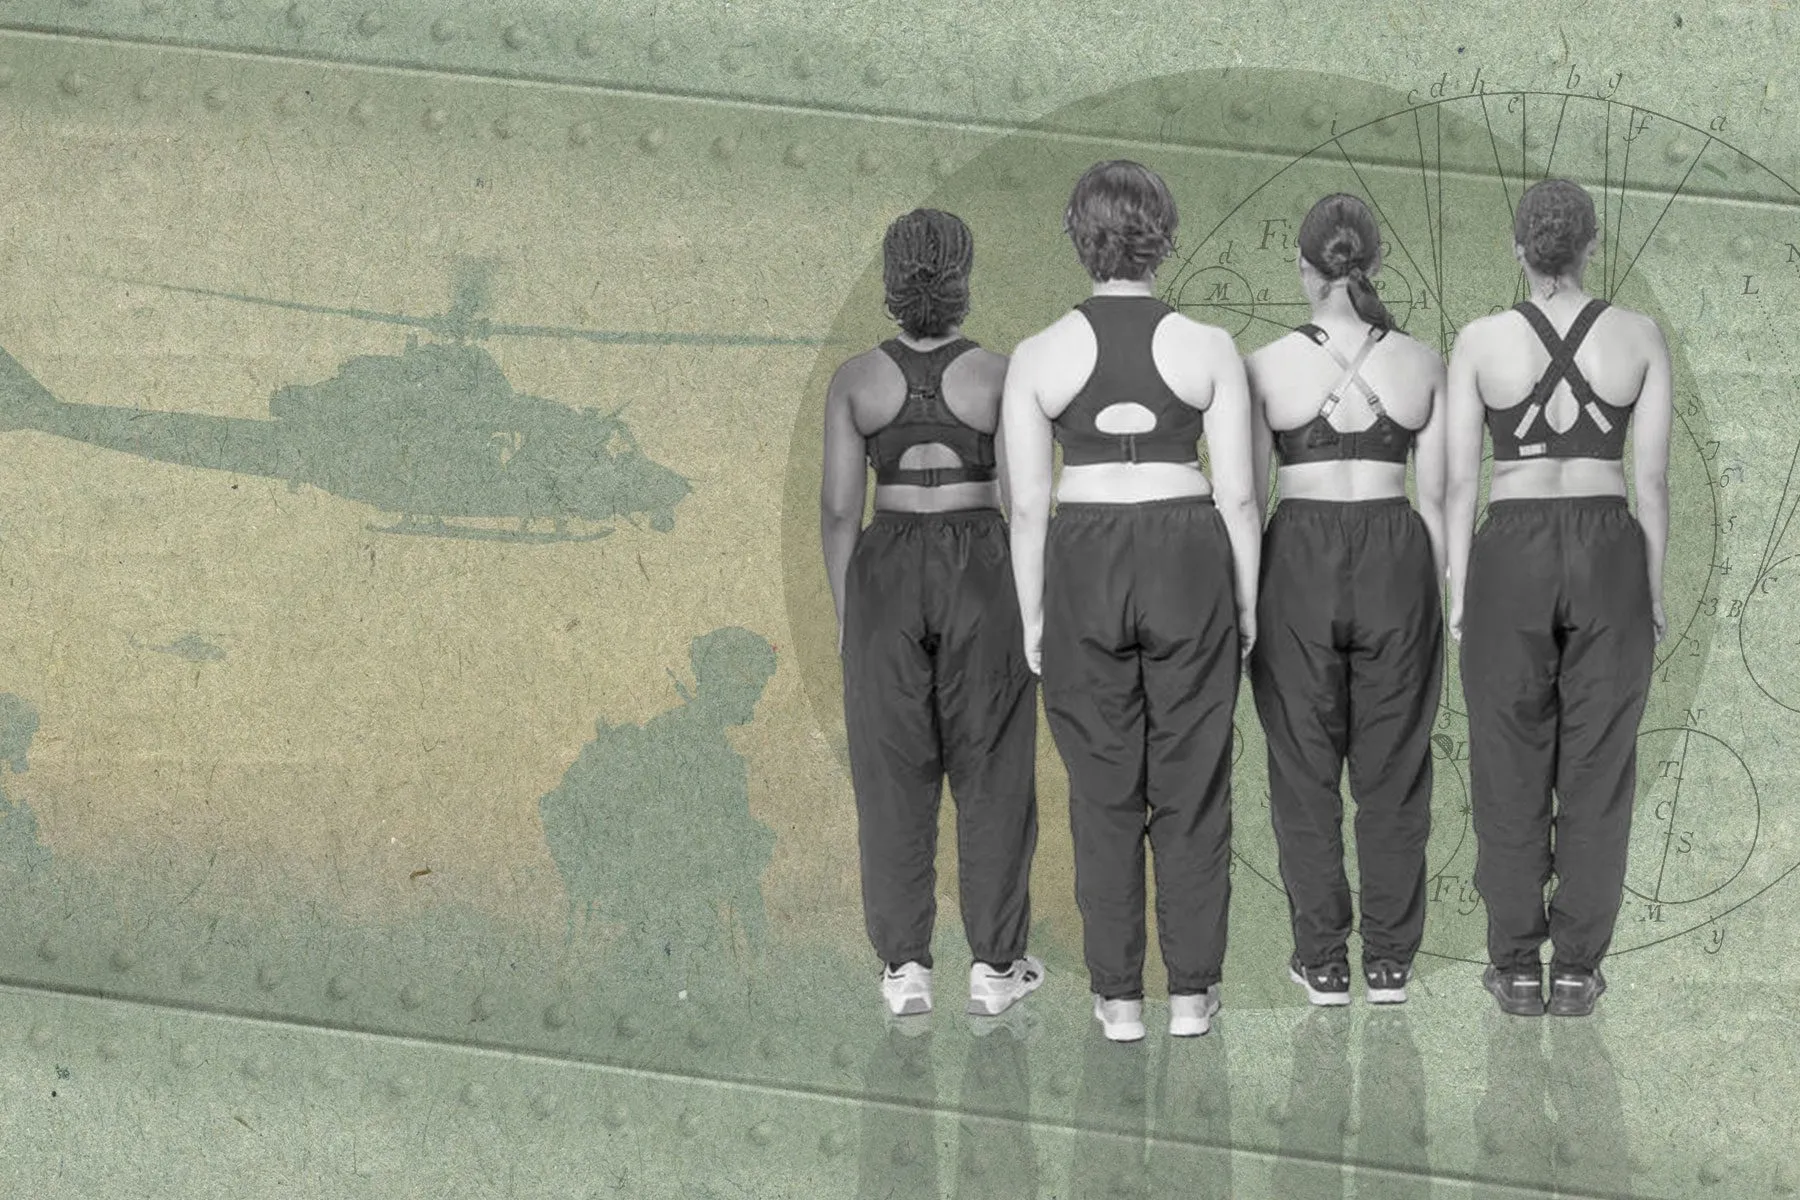 Is the military developing underwear that thinks?